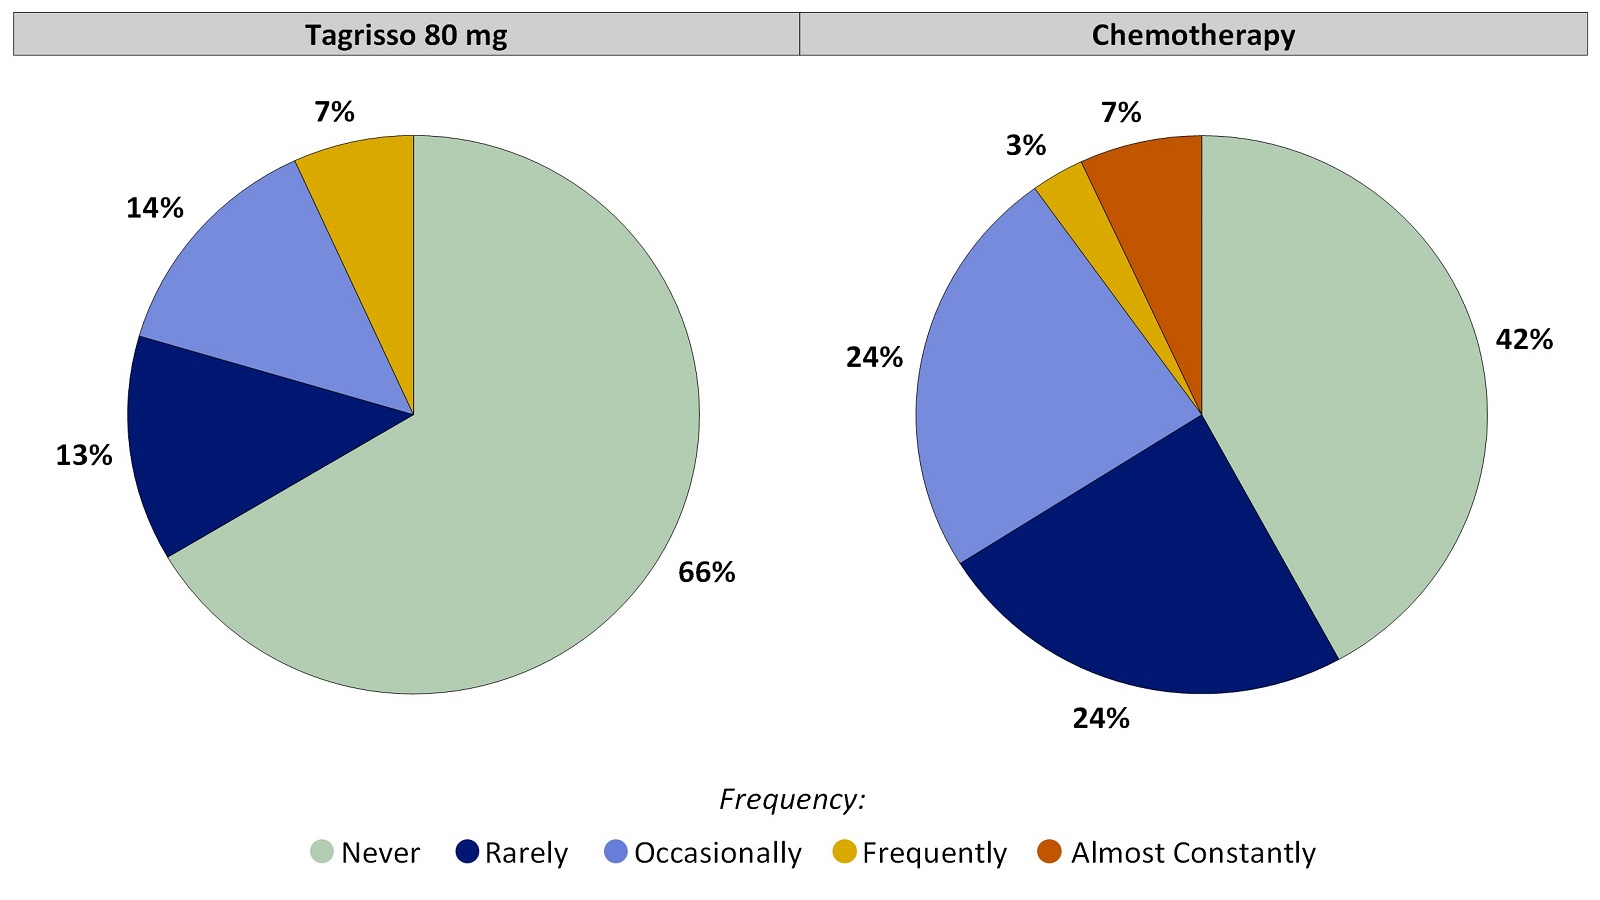 Two pie charts, one for Tagrisso and the other for chemotherapy, which includes only those patients who had no chills before treatment. The pie charts summarize the percentage of patients by worst reported chills. In the Tagrisso arm, Never (66%), Rarely (13%), Occasionally (14%), Frequently (7%) and Almost constantly (0%). In the chemotherapy arm, Never (42%), Rarely (24%), Occasionally (24%), Frequently (3%) and Almost constantly (7%).